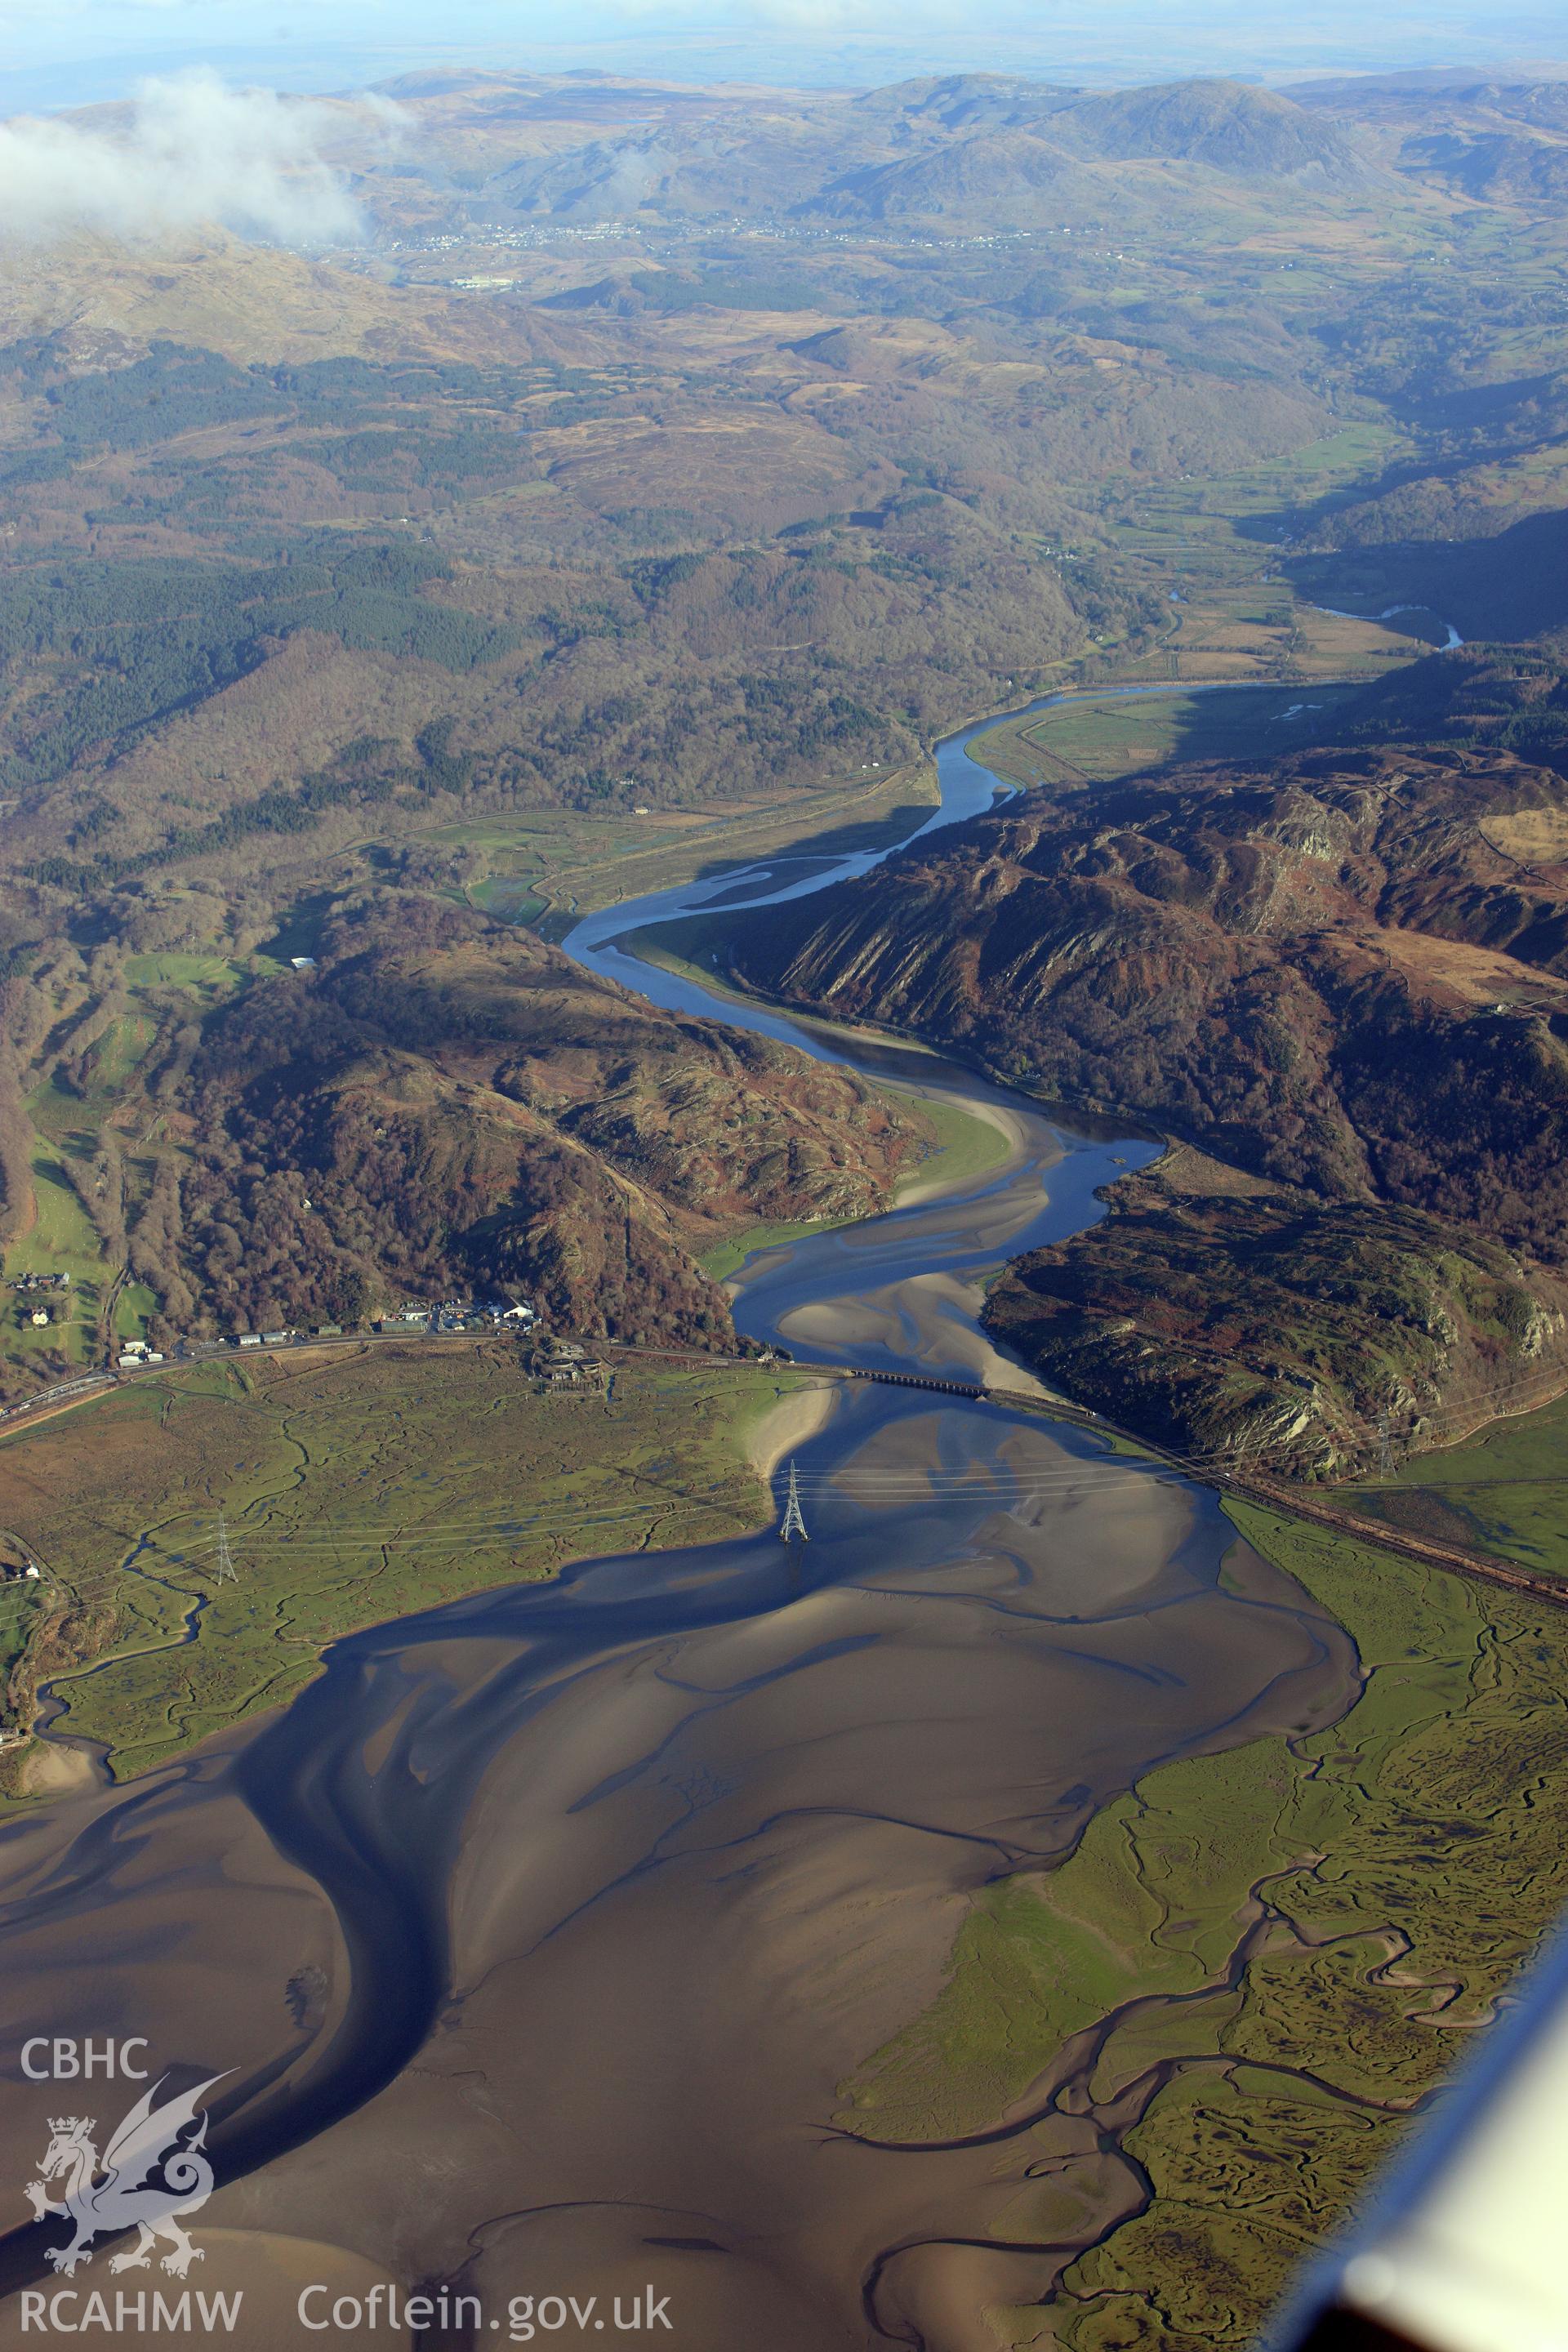 RCAHMW colour oblique photograph of Pont Briwet and Afon Dwyryd estuary, high view from west. Taken by Toby Driver on 10/12/2012.